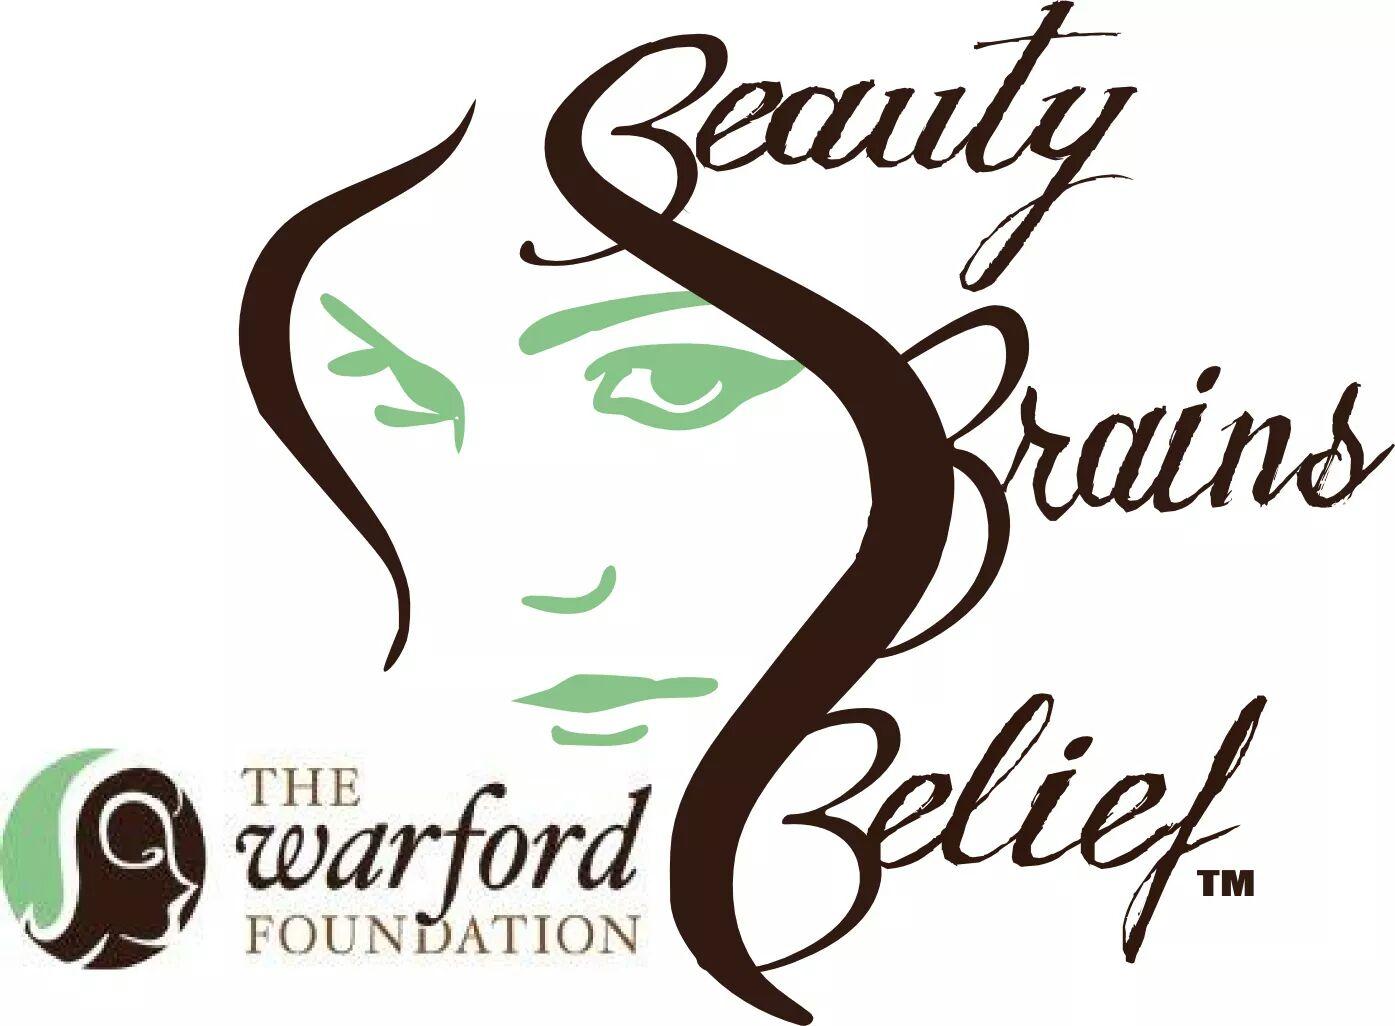 Beauty Brains Belief™ Mentoring Program is designed to mentor all single mother and military widow lead families within the DC Metro Area FREE of charge.